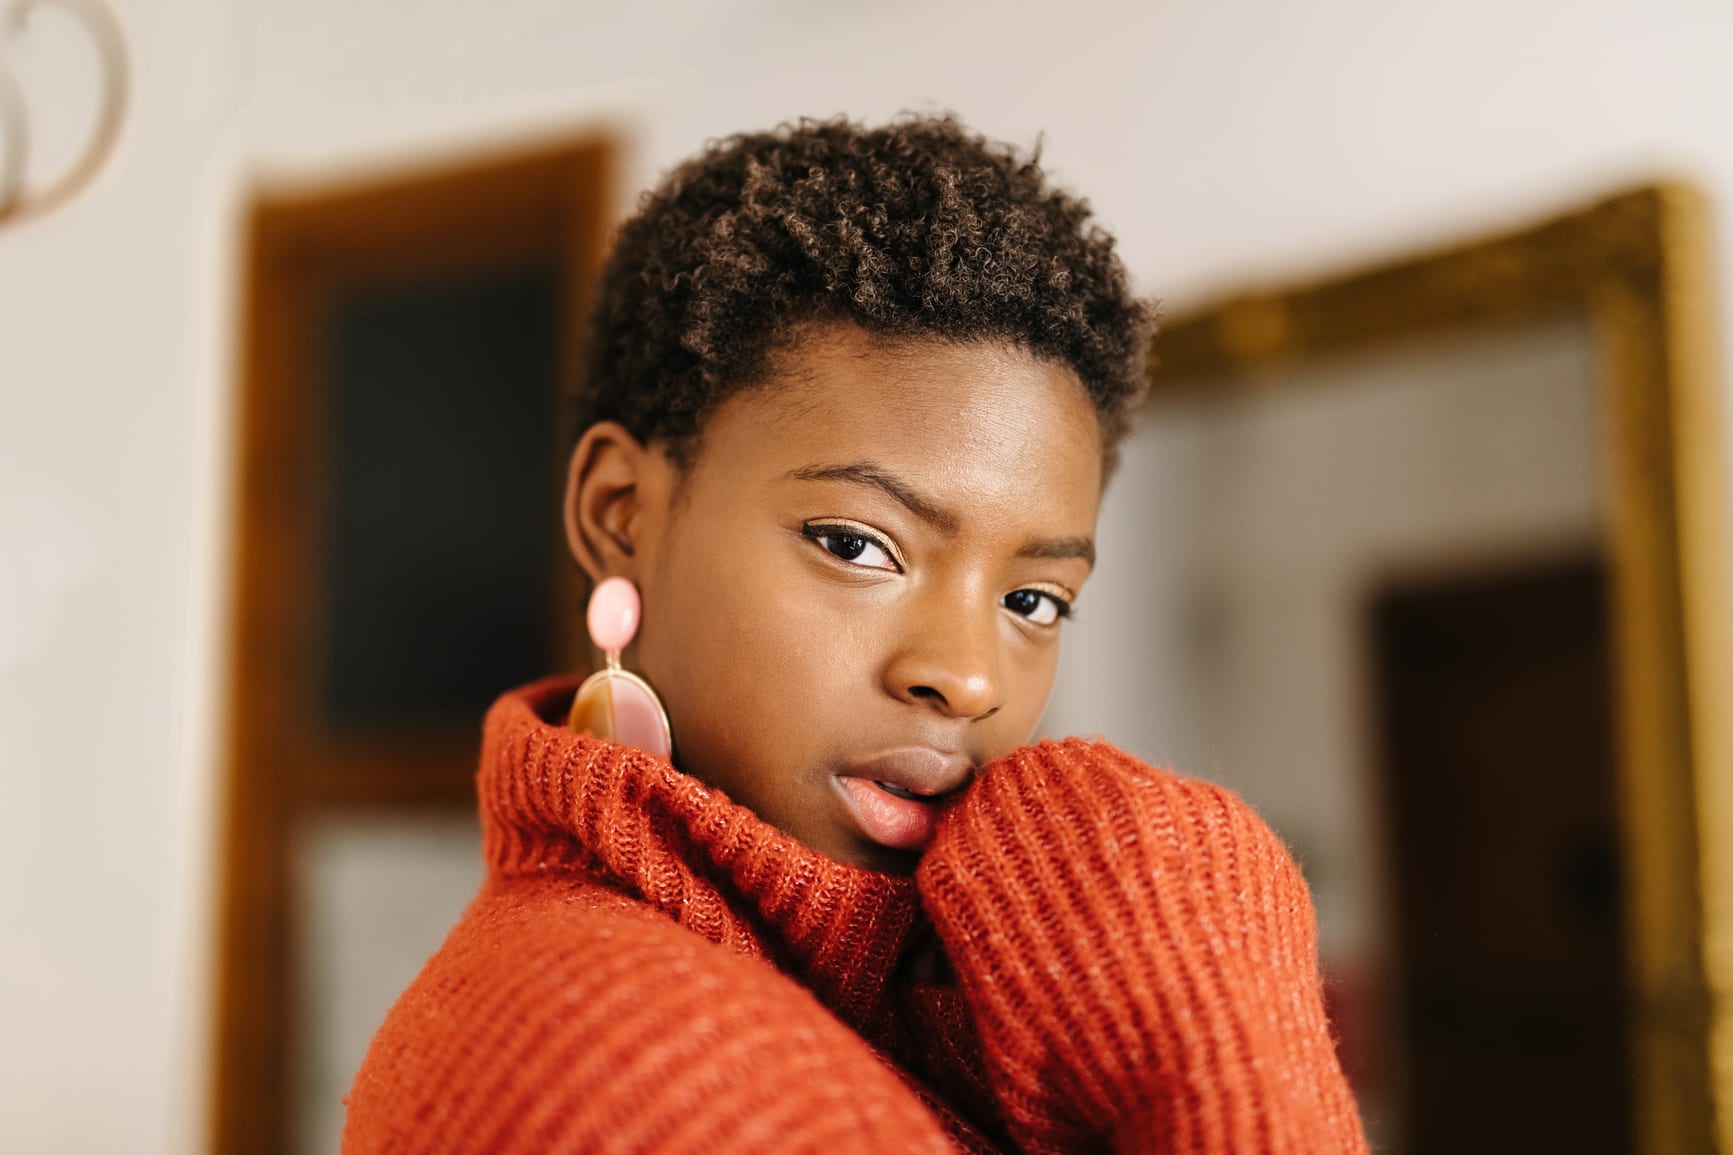 Lovely African American female looking at camera in orange wool sweater touching face while standing near open window in cozy apartment